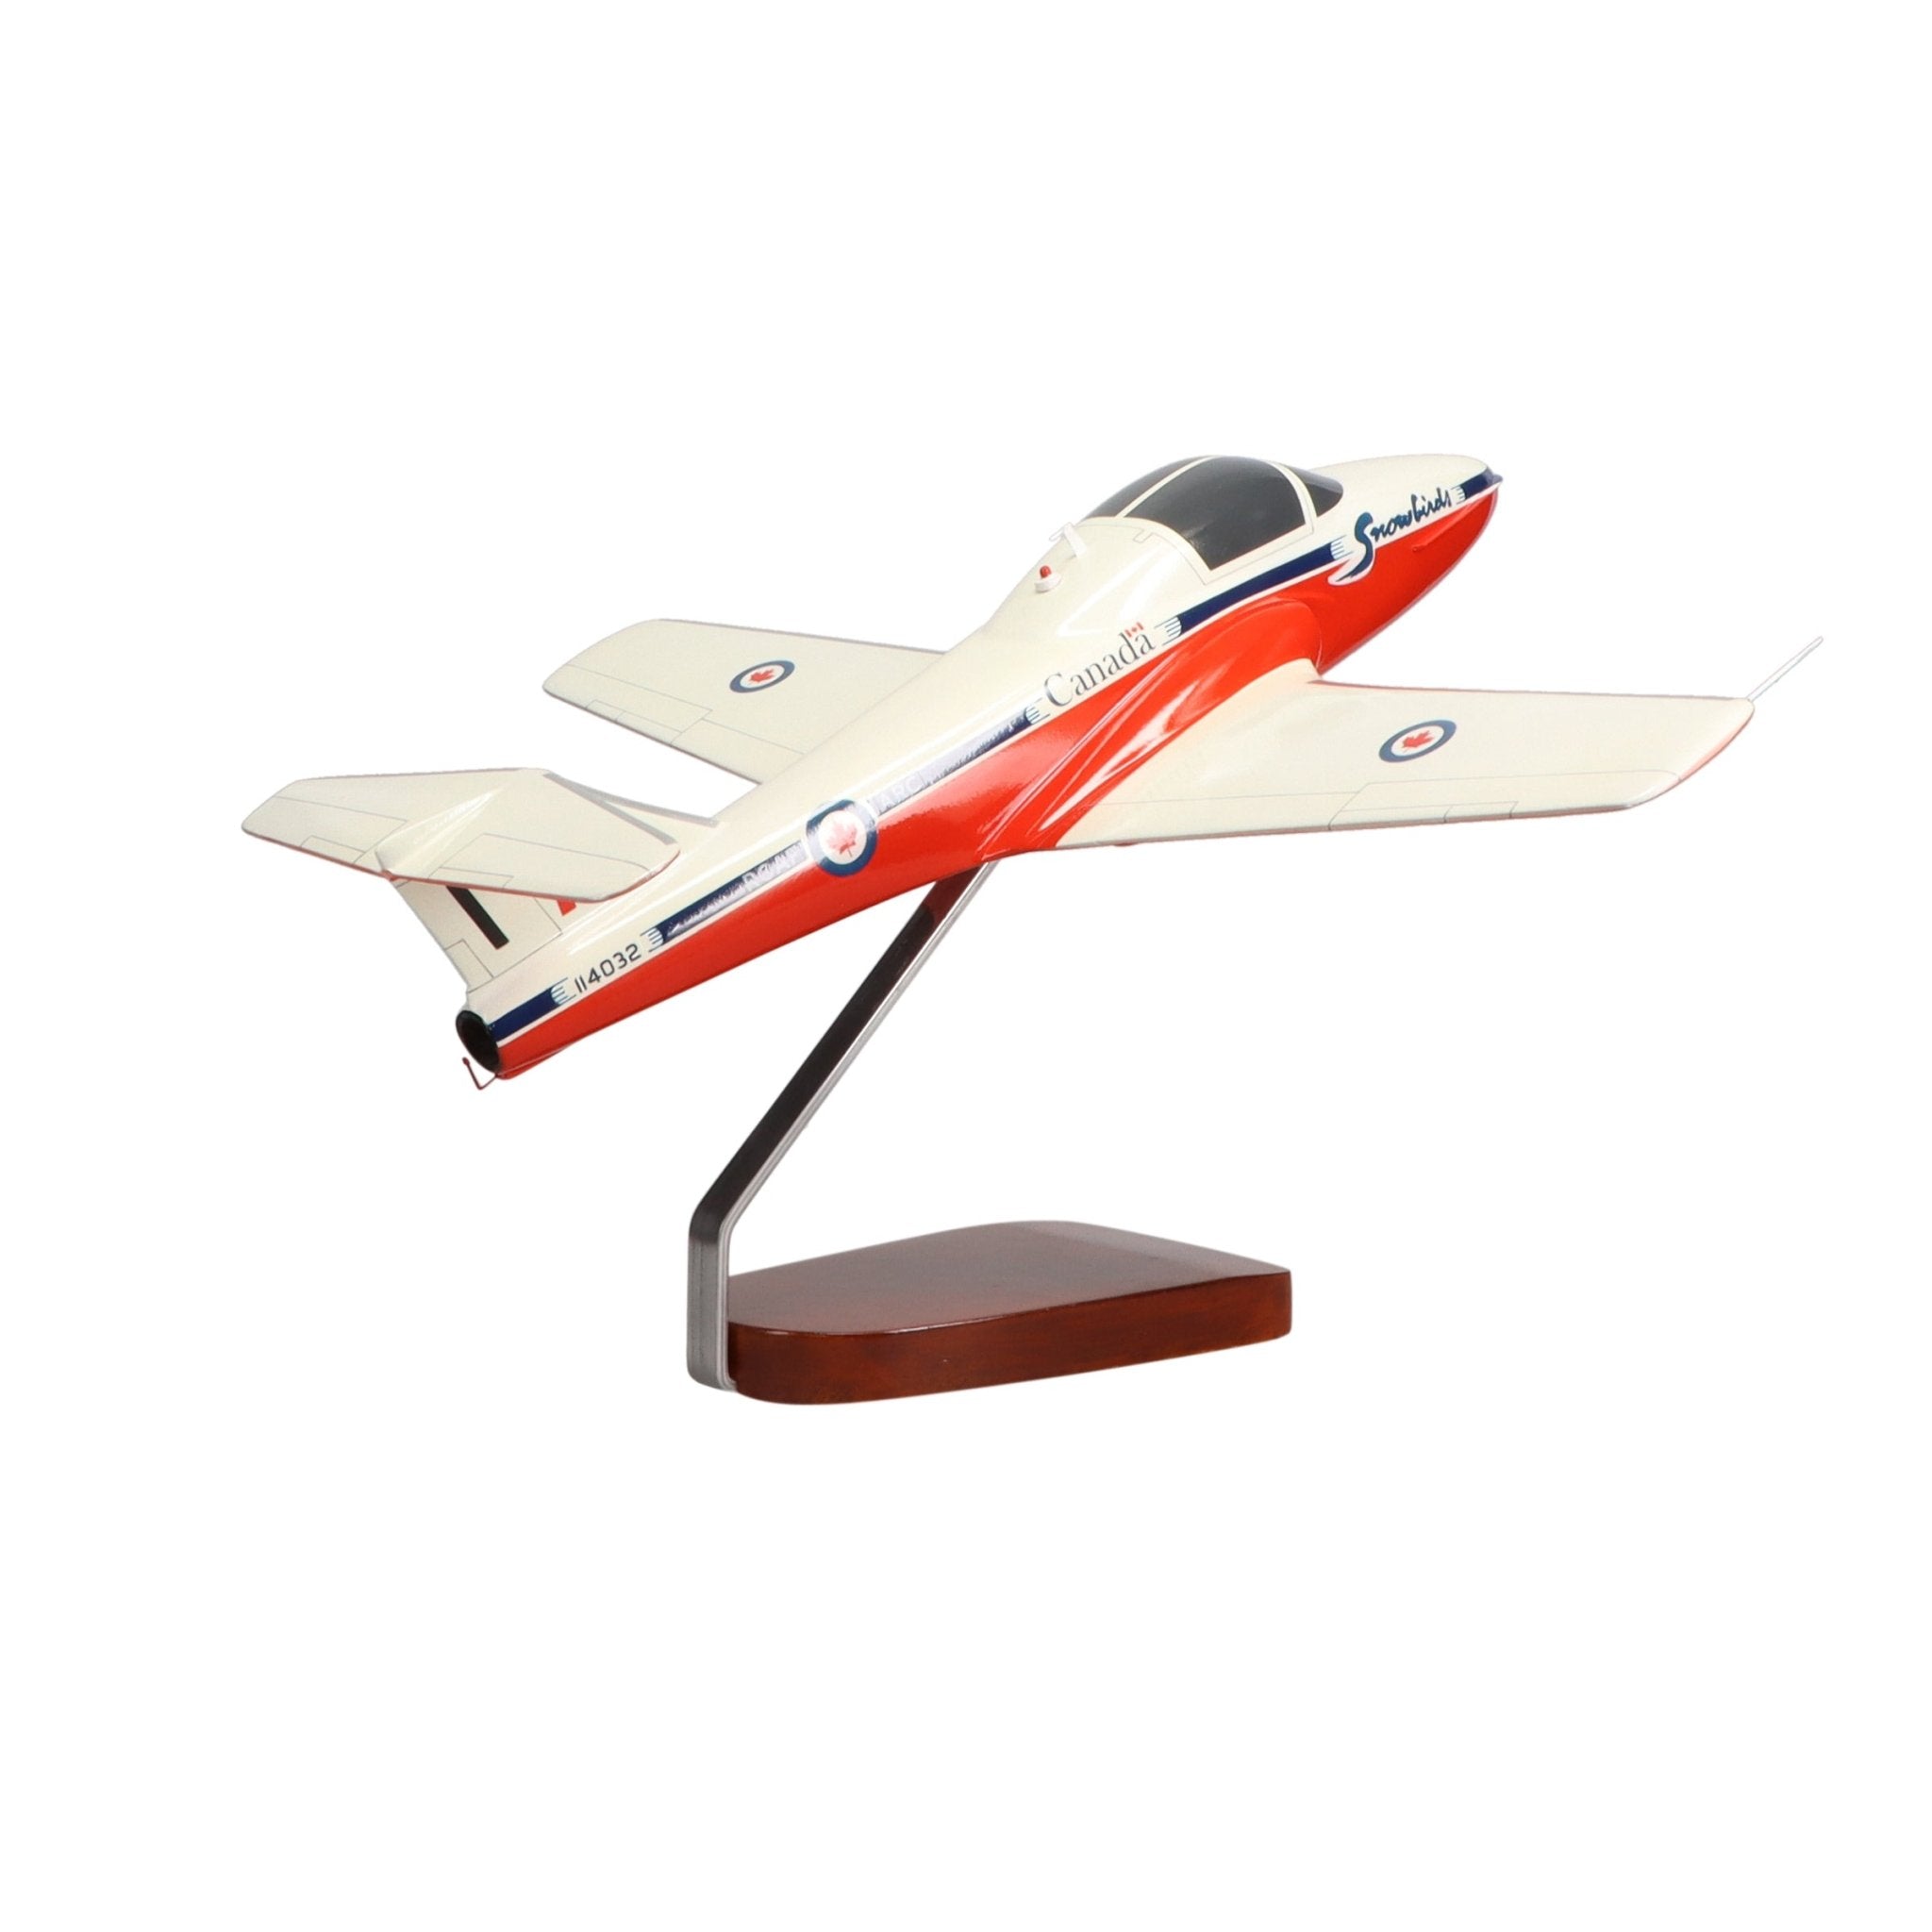 Canadair CT-114 Tutor Canadian Forces Snowbirds Limited Edition Large Mahogany Model - PilotMall.com